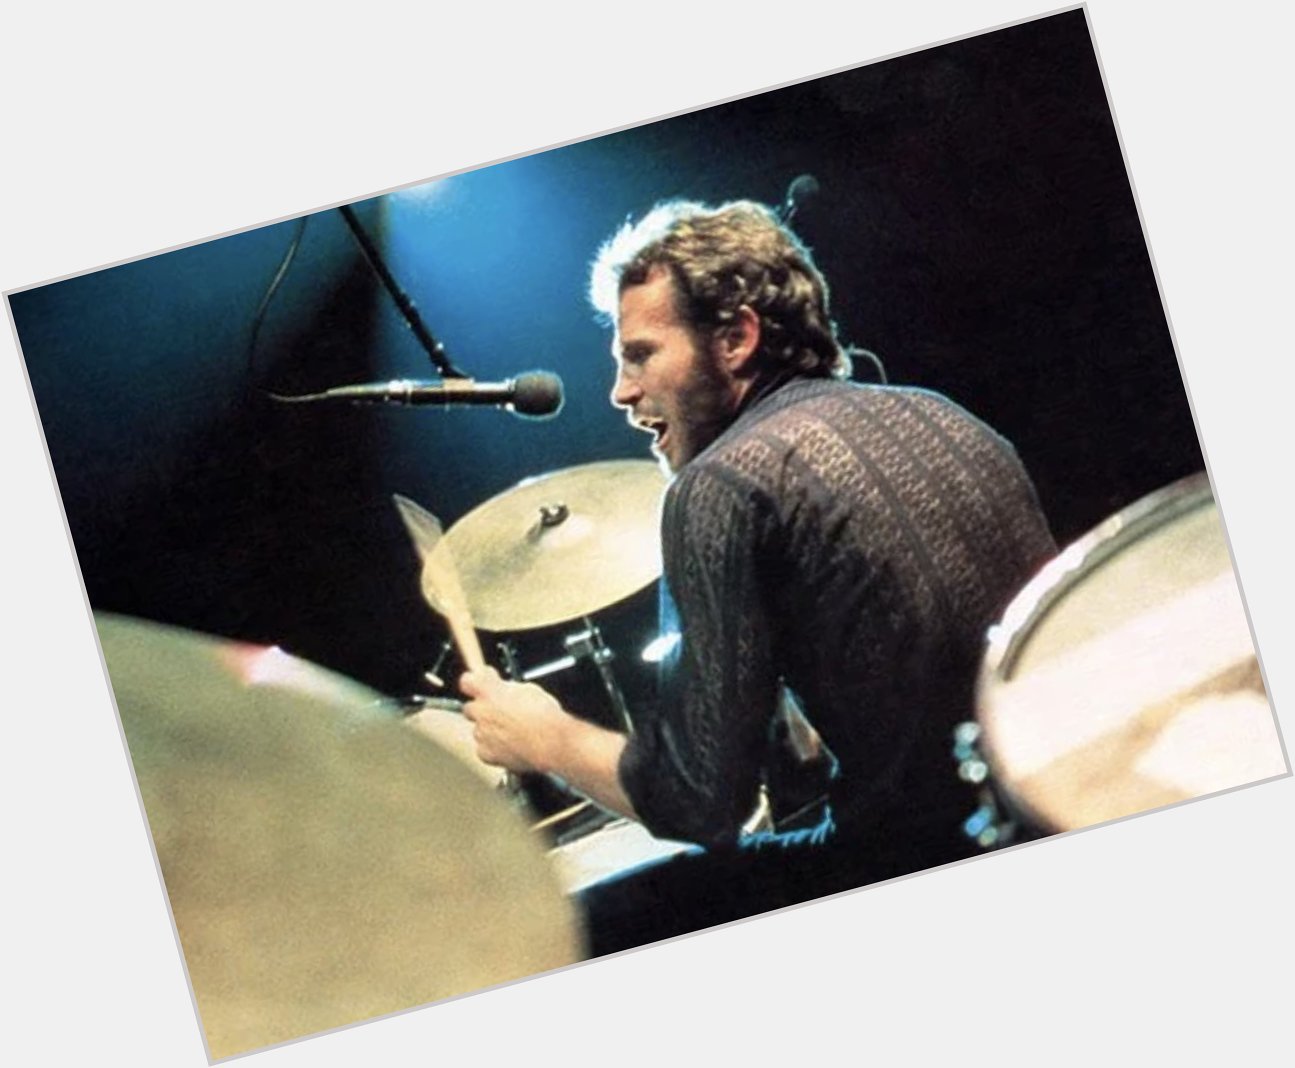 Happy Birthday to the great Levon Helm.
He was born on May 26, 1940 in Elaine Arkansas 